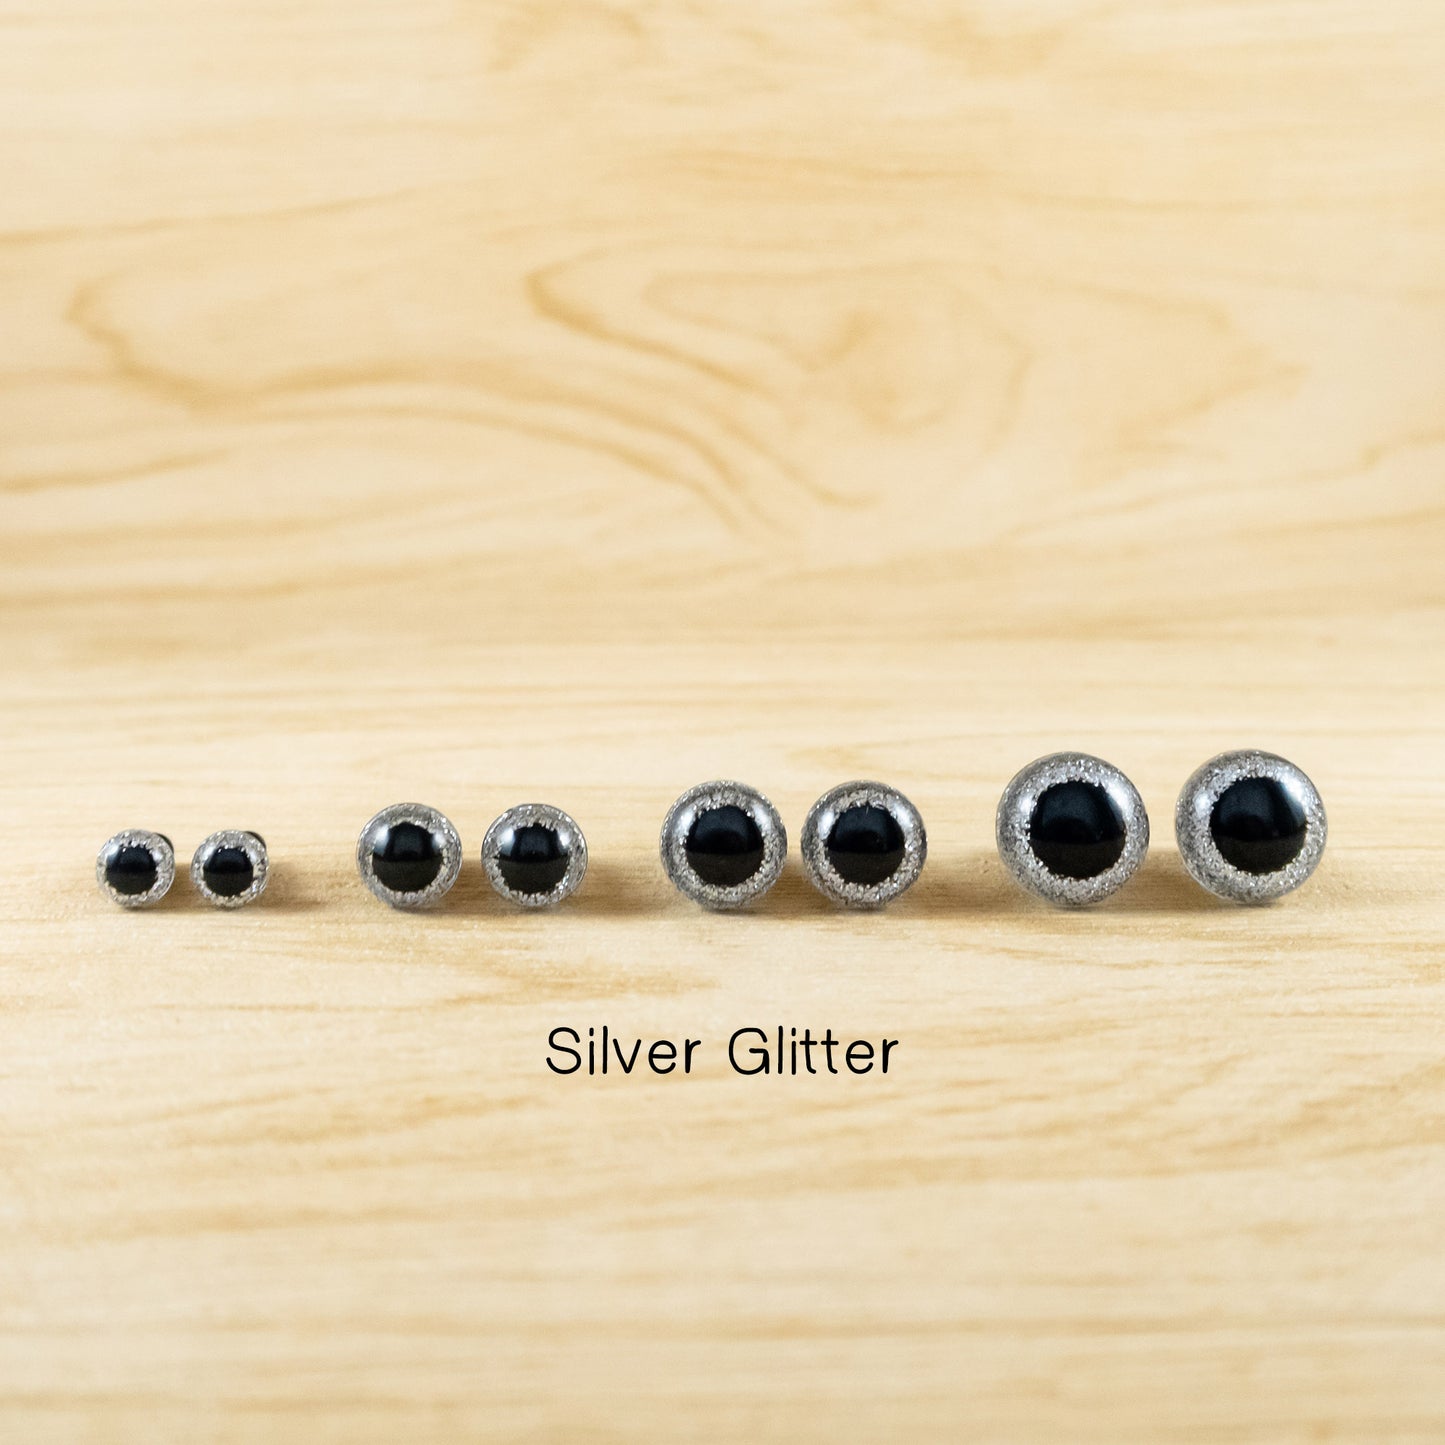 Silver Glitter Safety eyes in sizes 6mm, 8mm, 10mm, 12mm